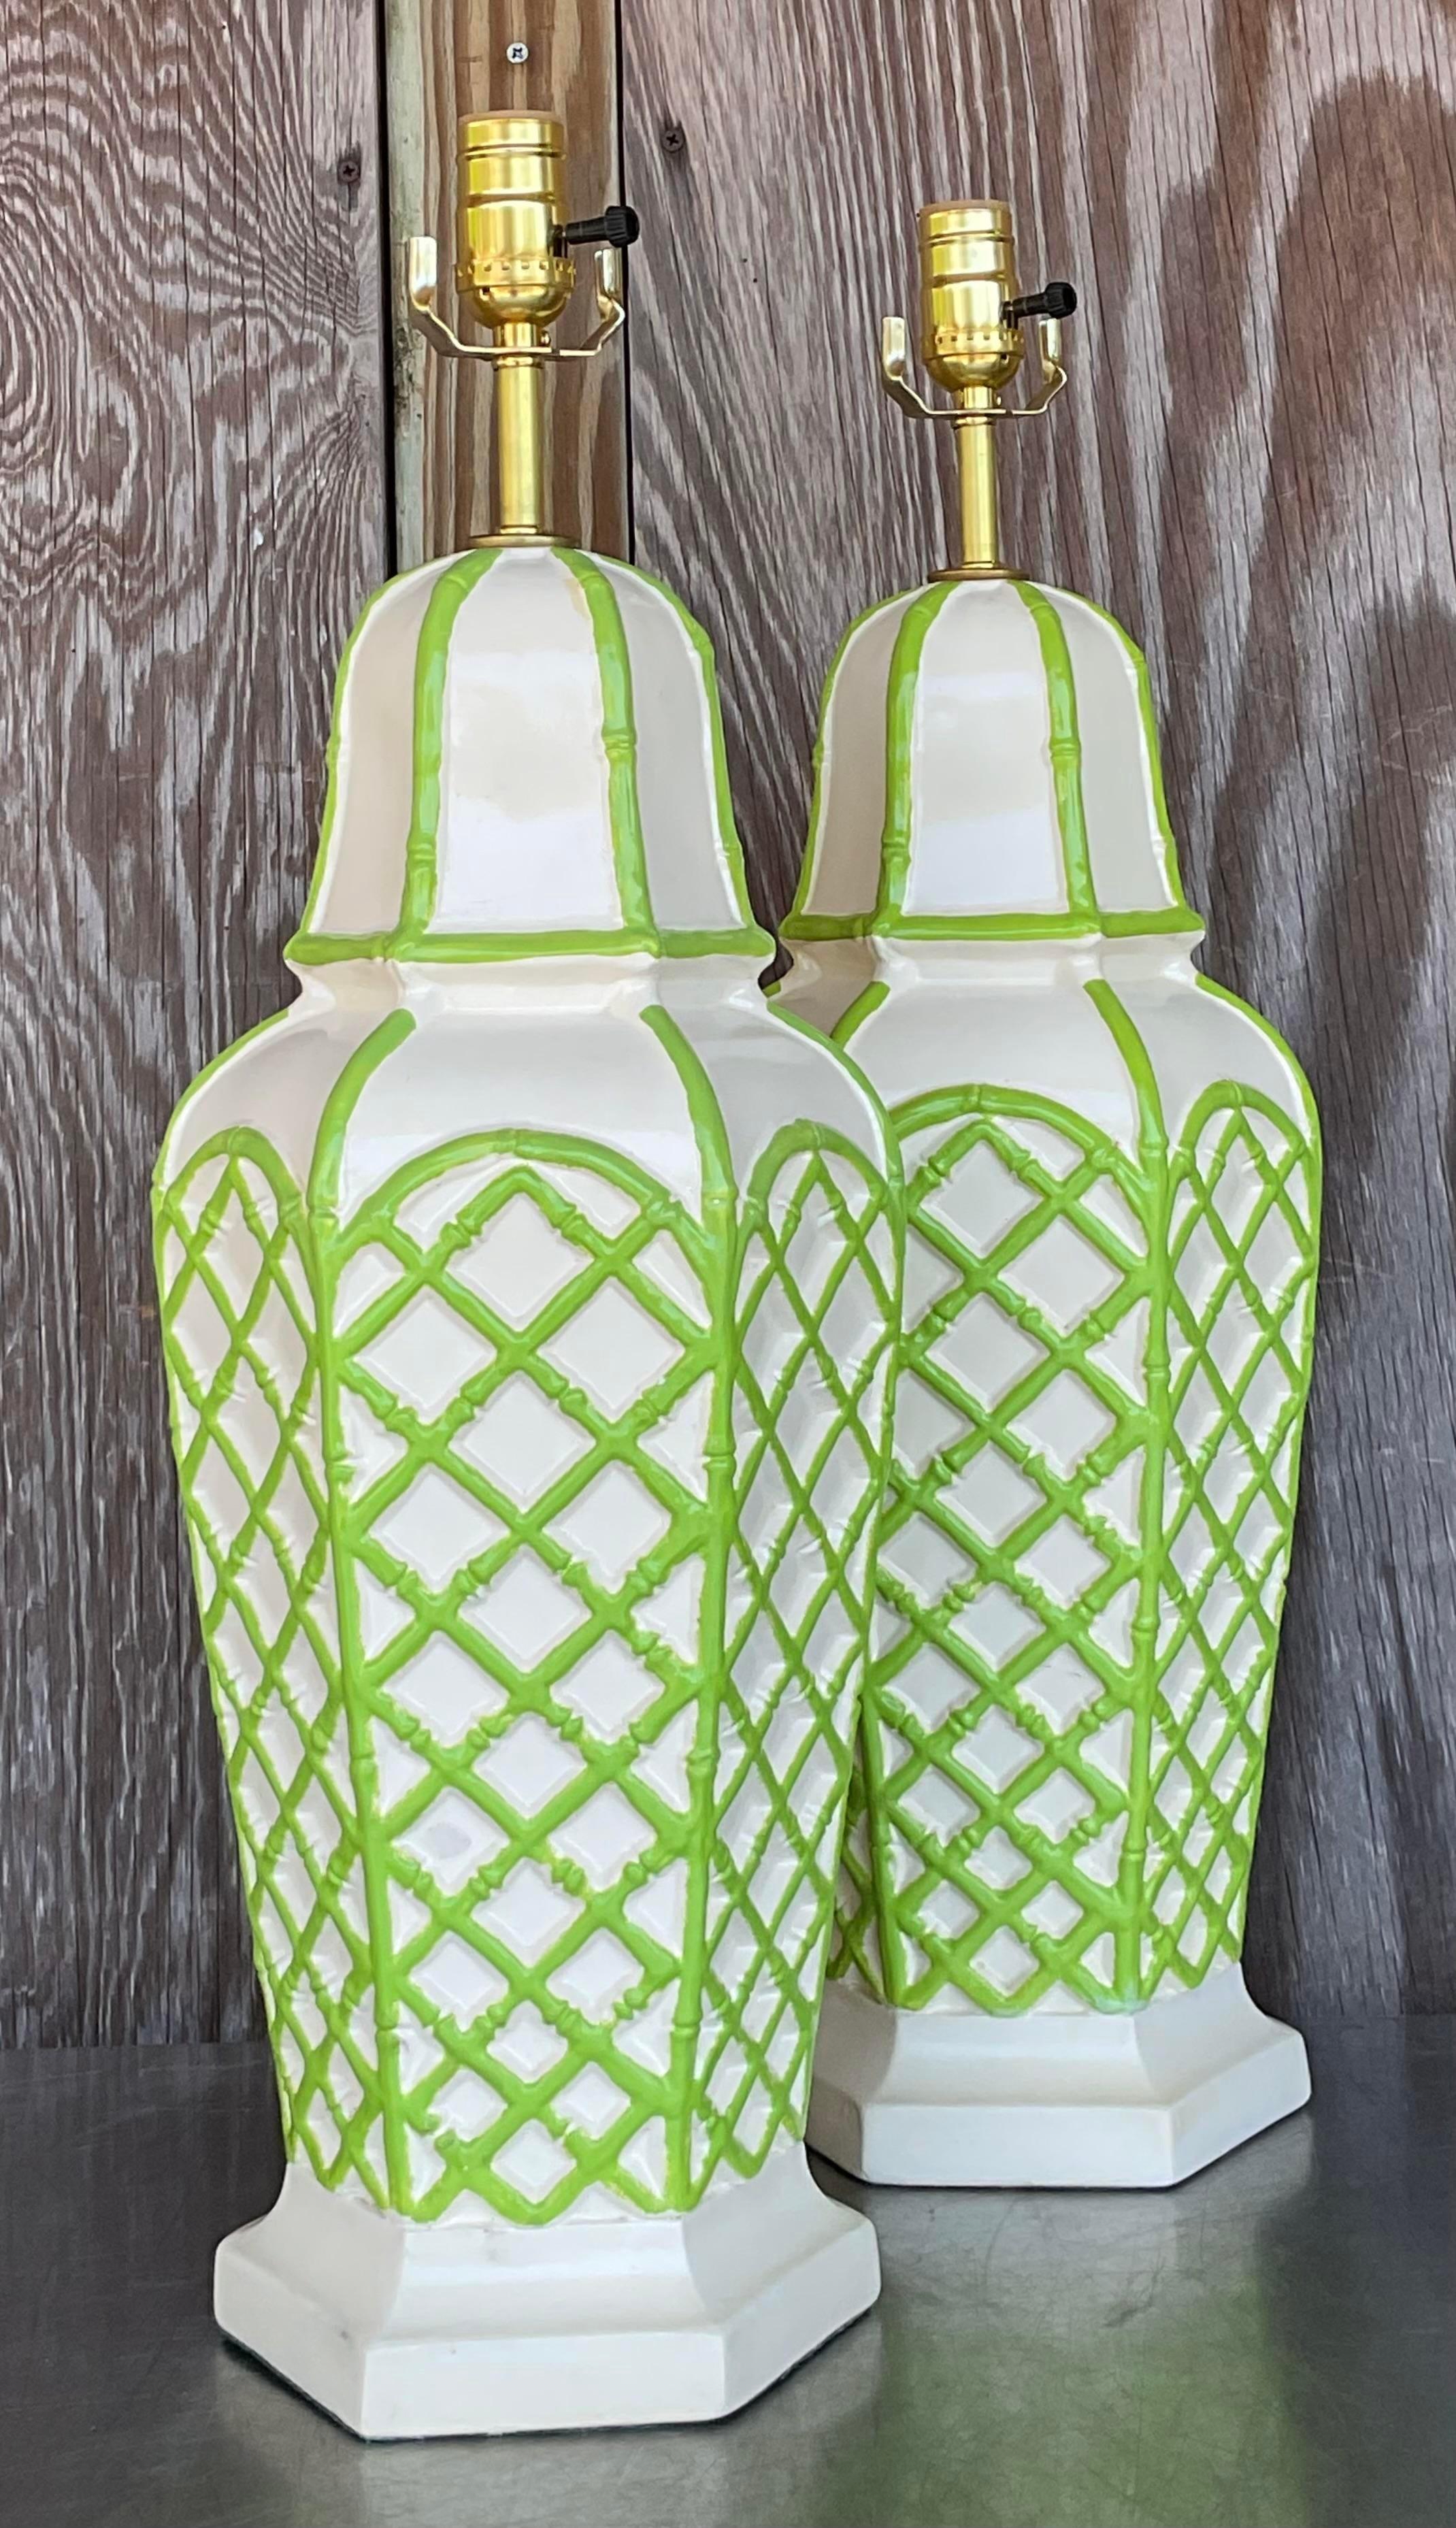 Illuminate your coastal retreat with this pair of vintage bamboo trellis glazed ceramic lamps. American-crafted with a nod to seaside charm, these lamps combine organic textures with glazed finishes, adding a touch of coastal elegance to any space